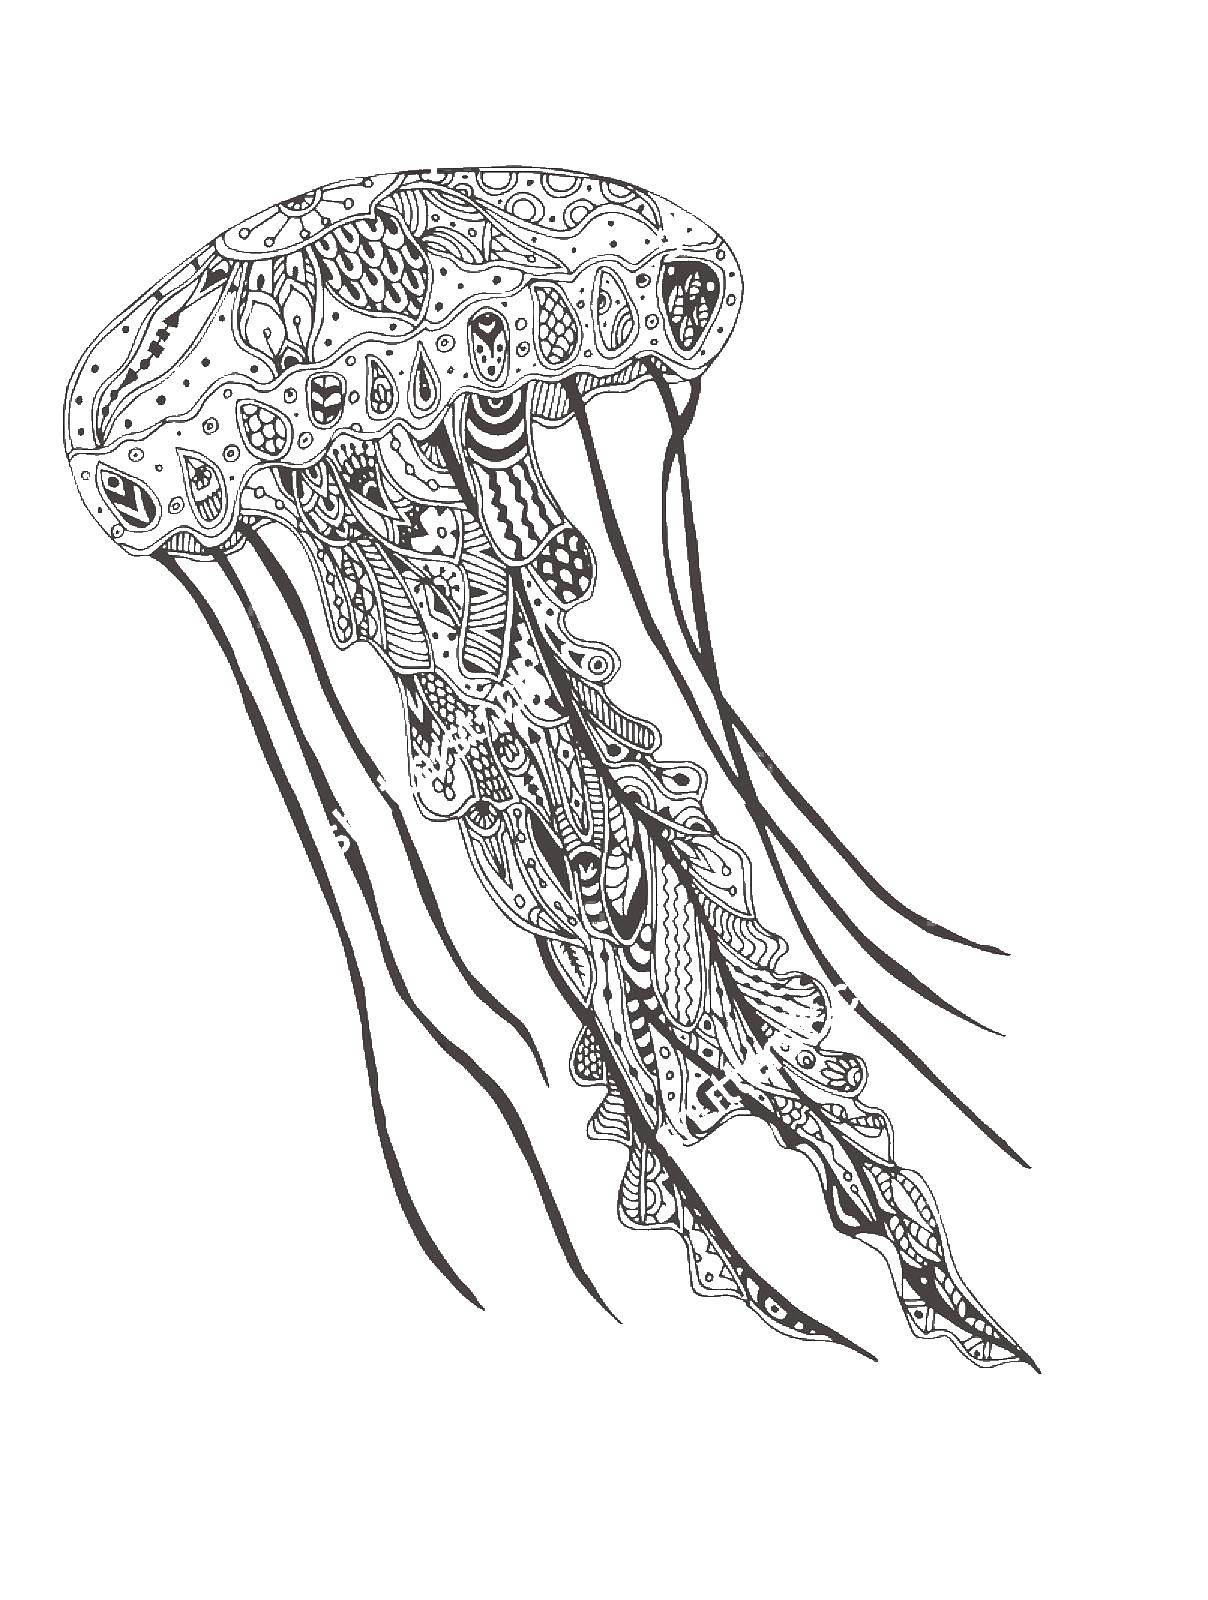 Coloring Jellyfish patterns. Category Sea animals. Tags:  Underwater world, jellyfish.